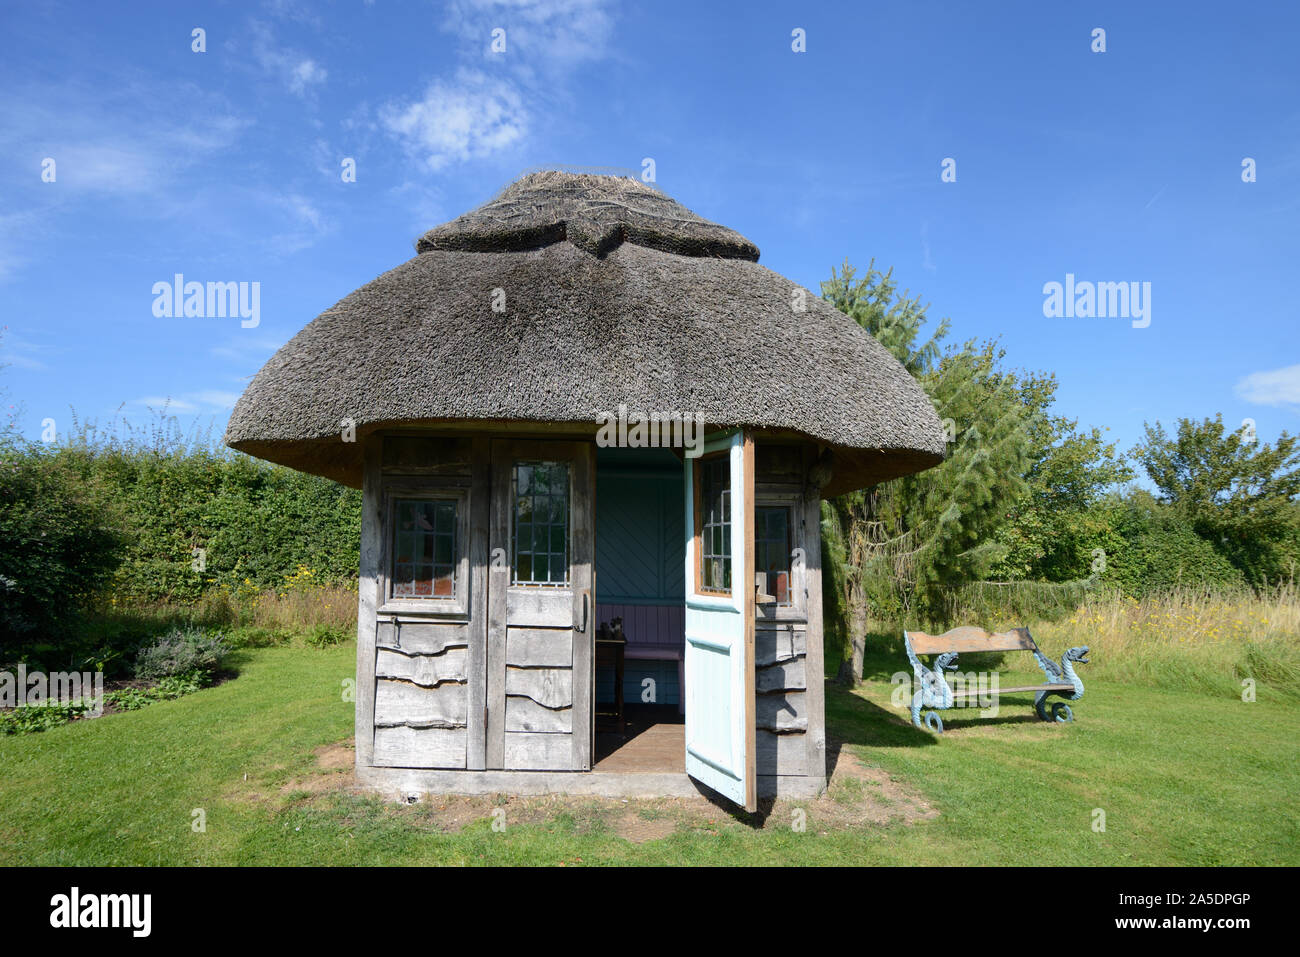 Thatched Garden Kiosk, Wooden Shed,  Hut, Pavilion, or Gazebo at the Garden of Heroes & Villains, Stratford-upon-Avon Stock Photo